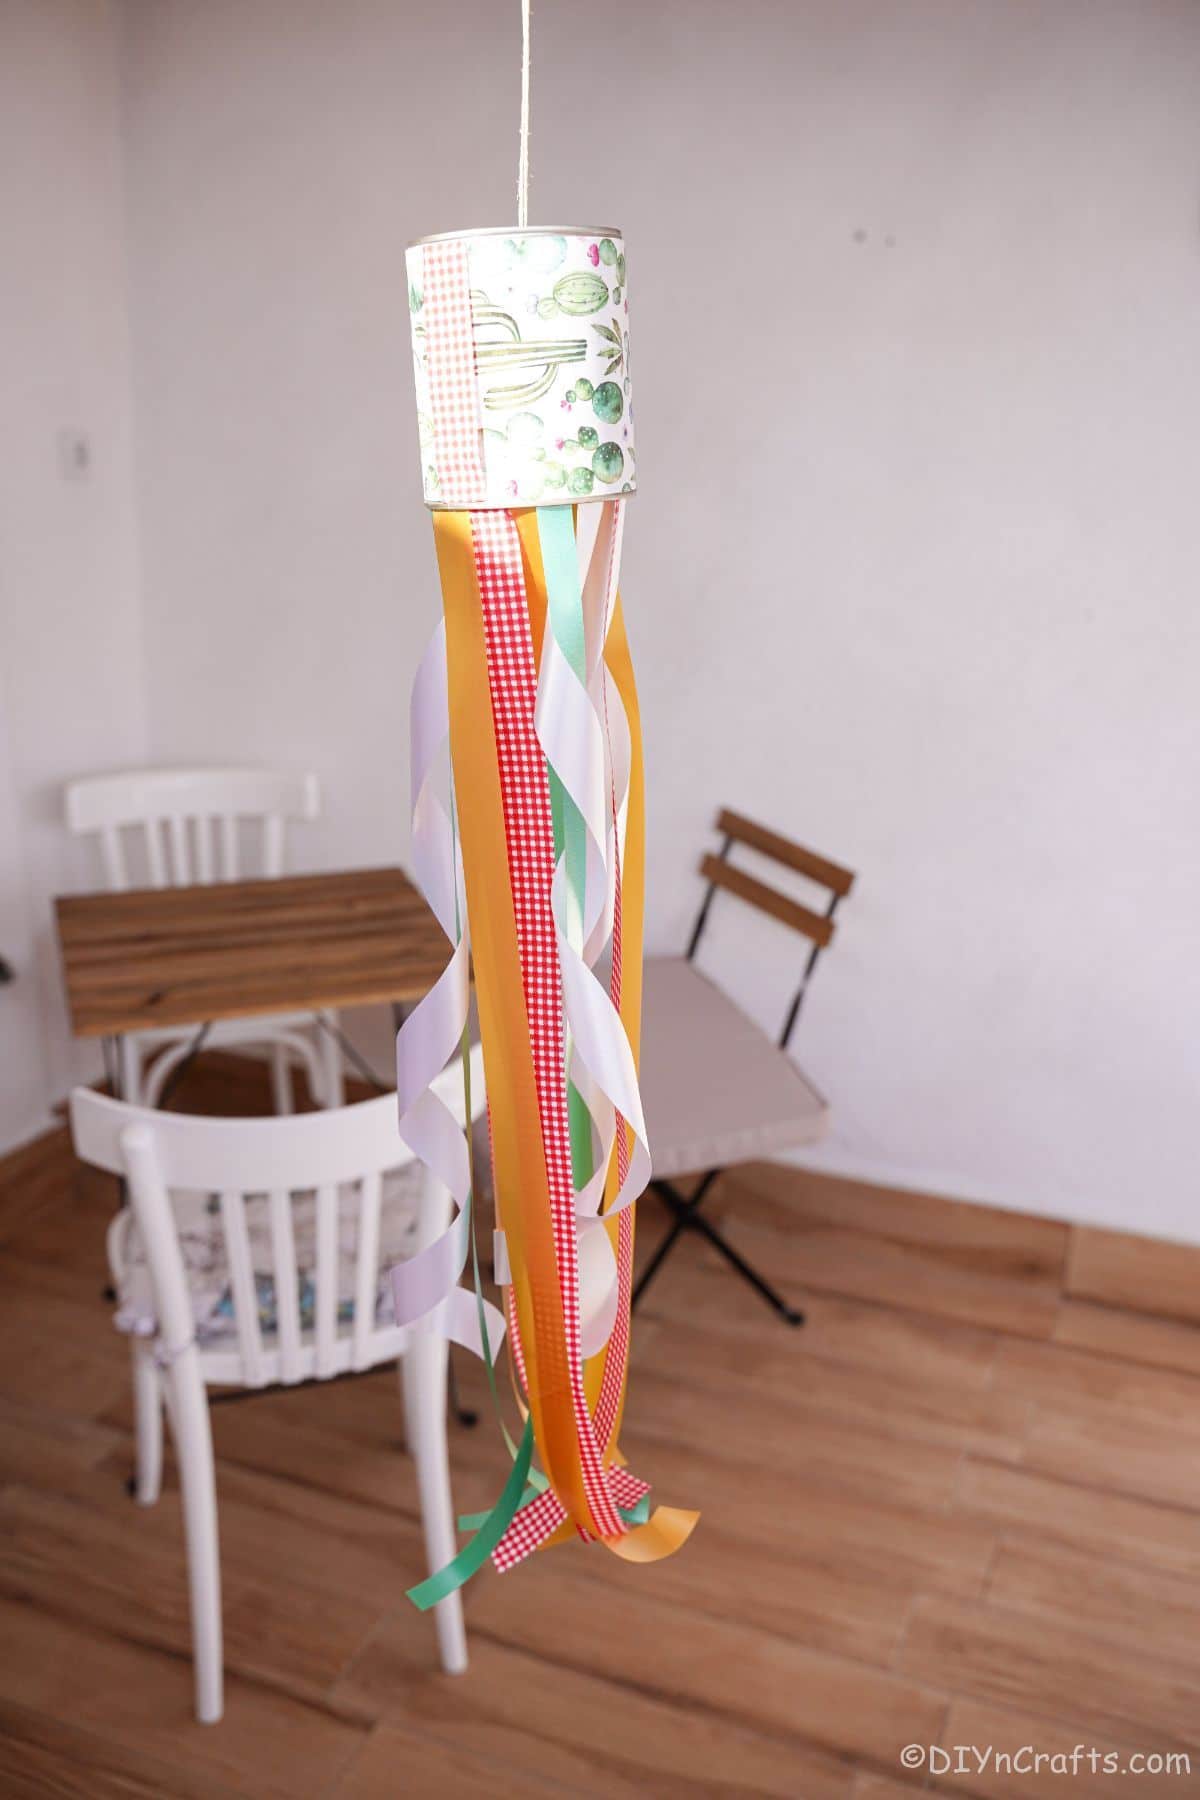 tin windsock hanging in front of a small table with white chairs